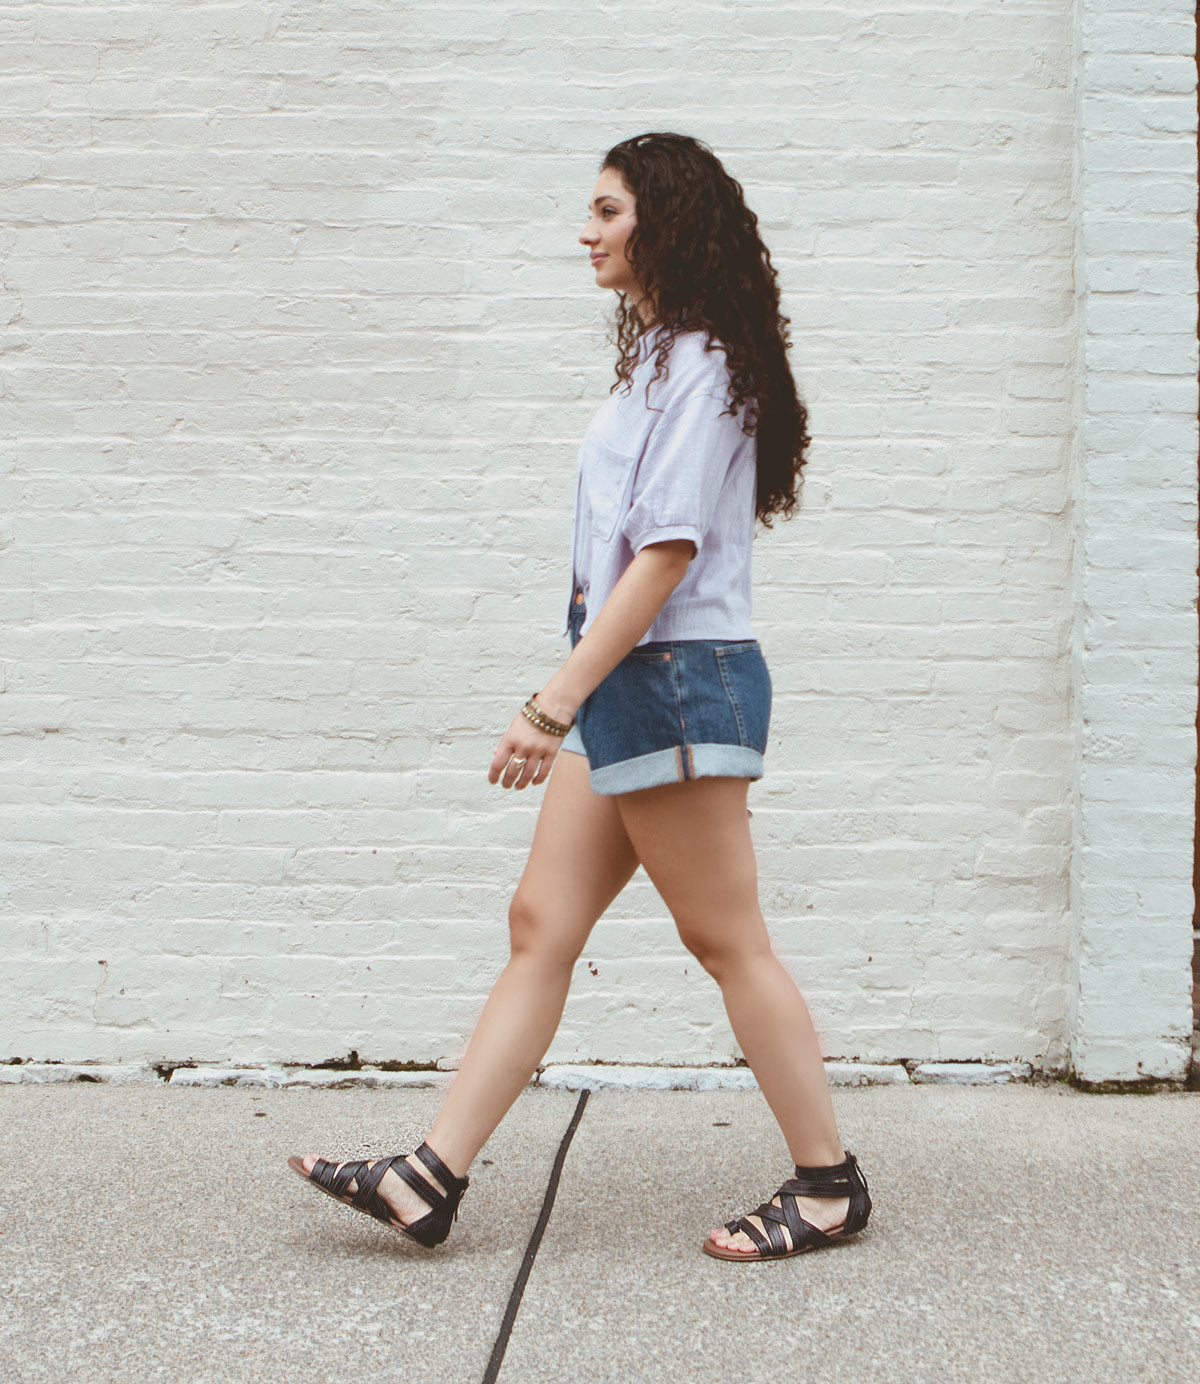 
                  
                    A woman with long curly hair walks along a sidewalk in front of a white brick wall, wearing a light shirt, denim shorts, and black leather Royalty sandals by Roan.
                  
                